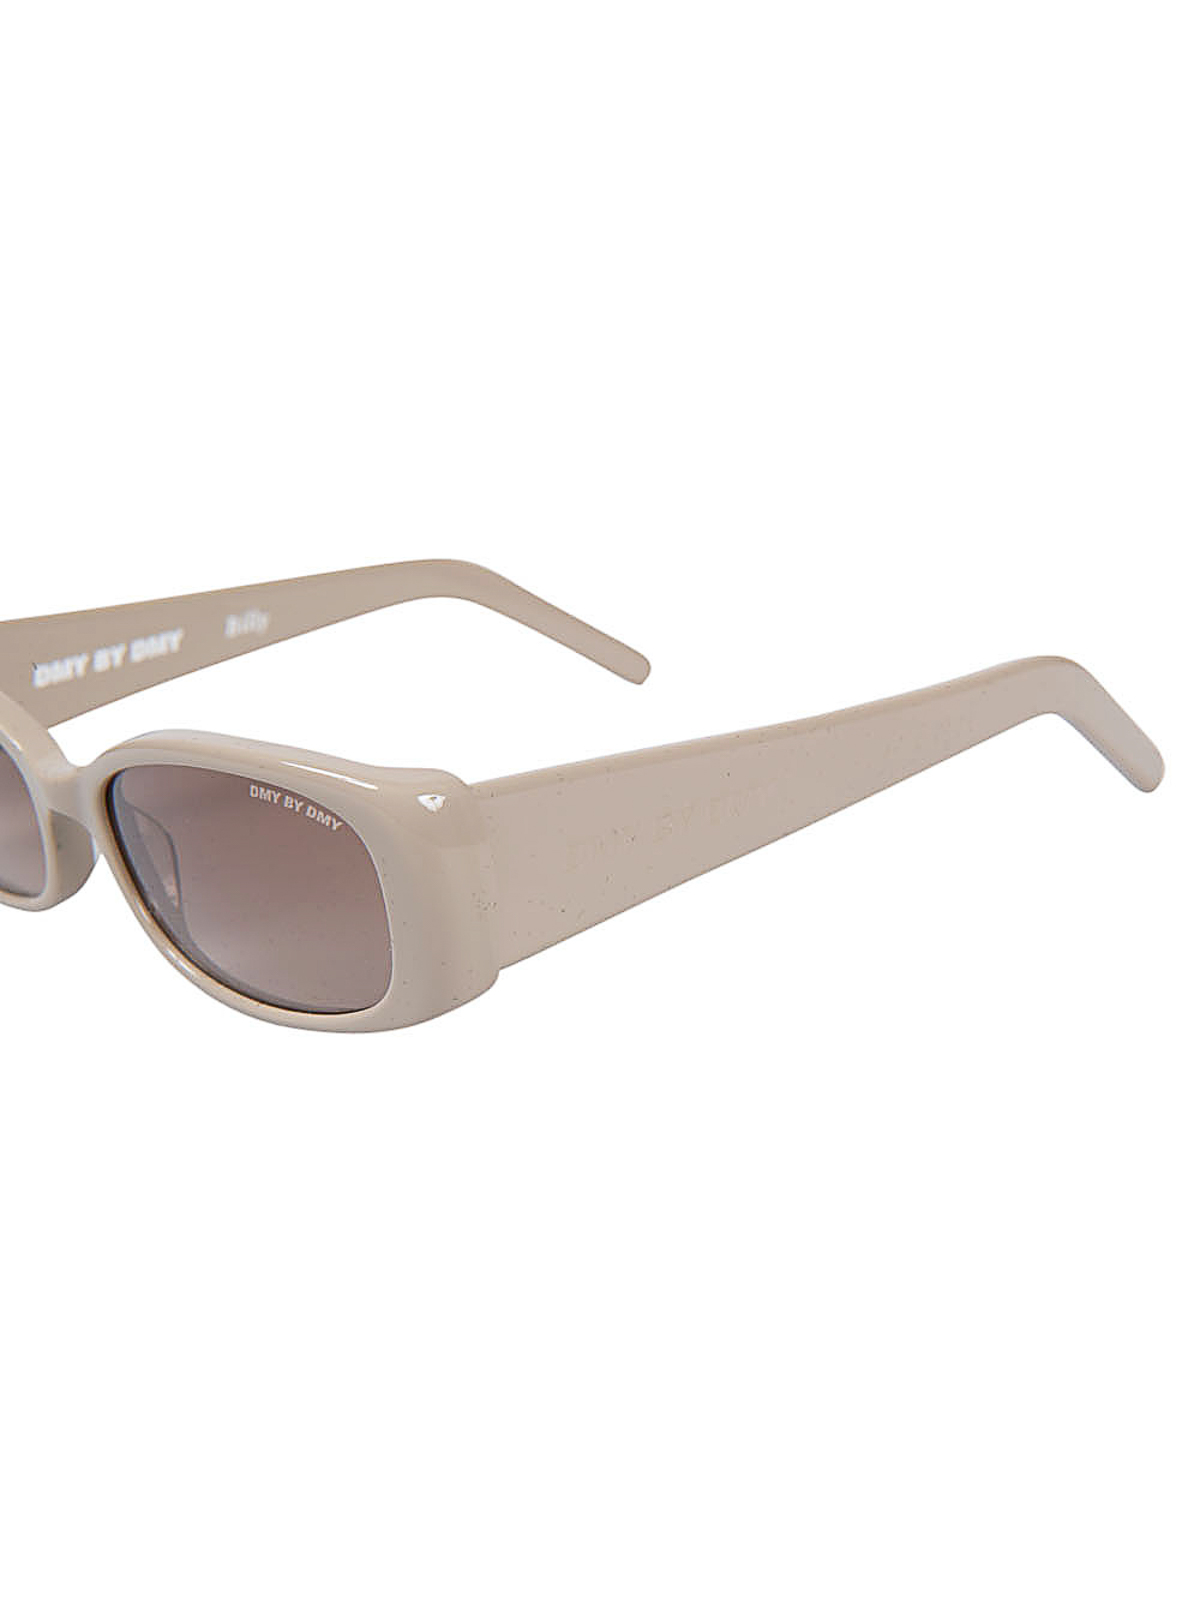 Shop Dmy By Dmy Branded Sunglasses In Beige